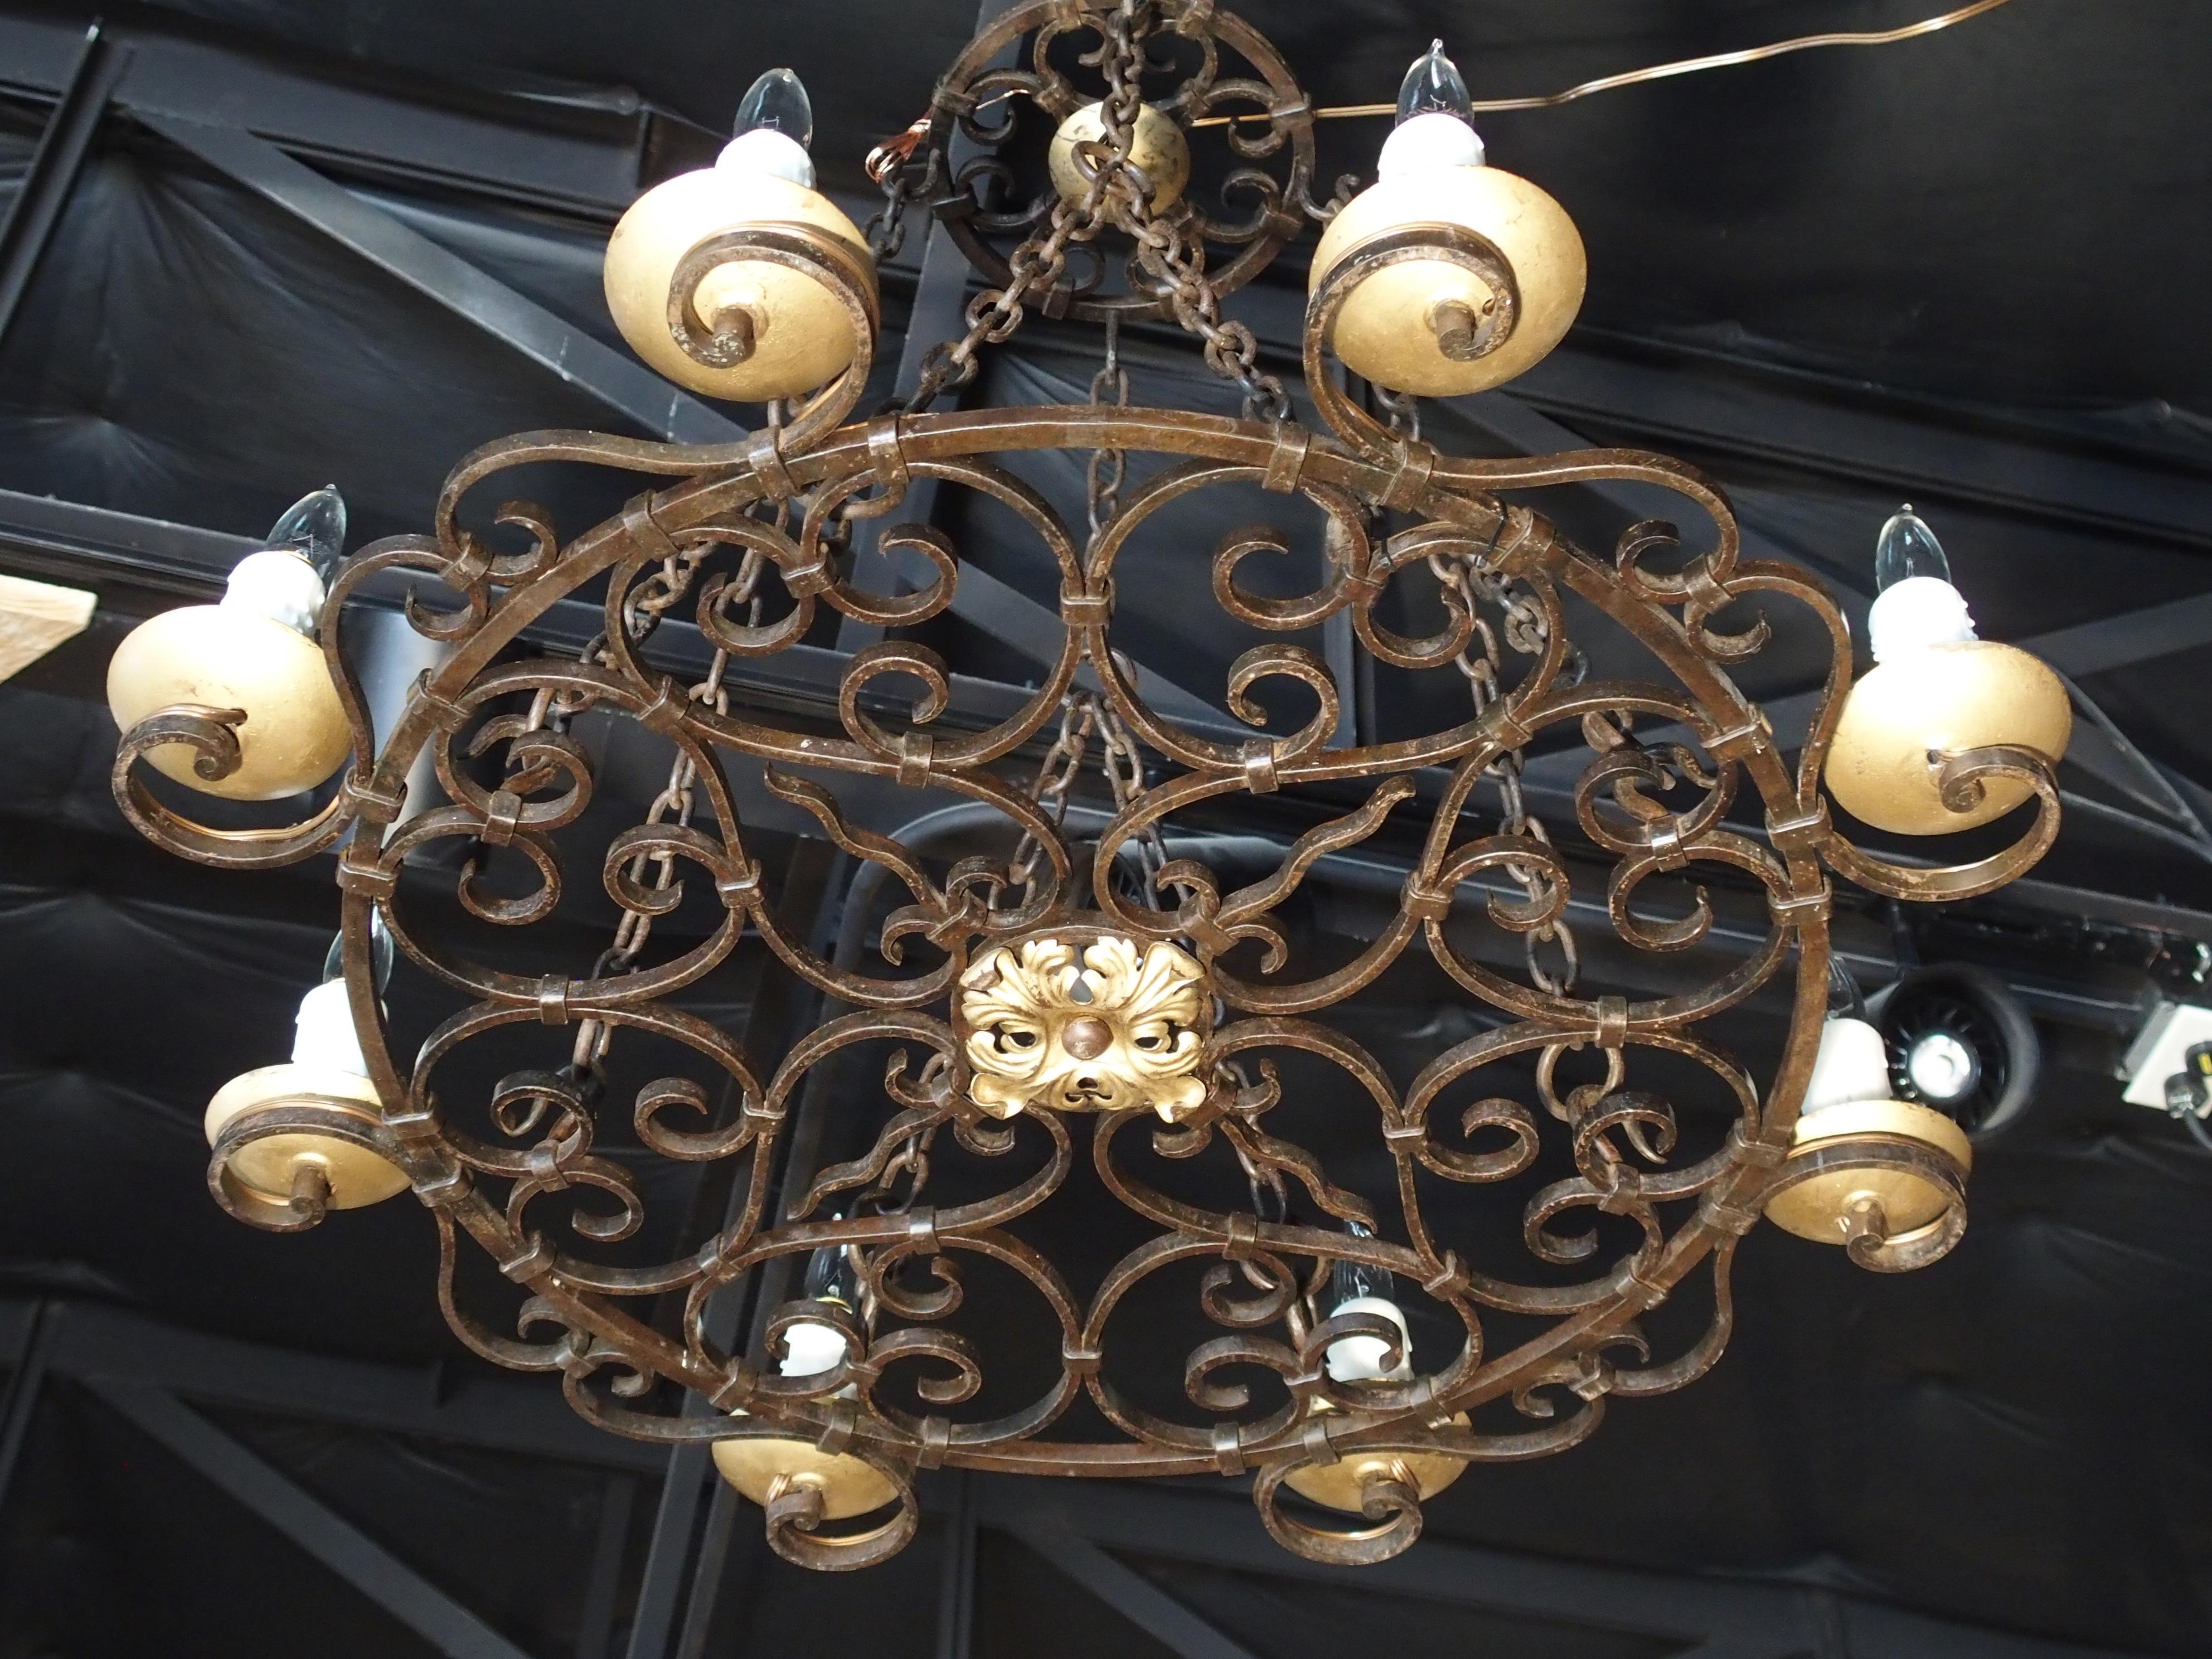 This attractive French iron chandelier is composed of 8 raised S-scroll motifs holding lights around its perimeter. Its central flat scrolling surface is ornamented with C-scrolls, oblong circles, and S-scrolls, with a gilt metal floret center